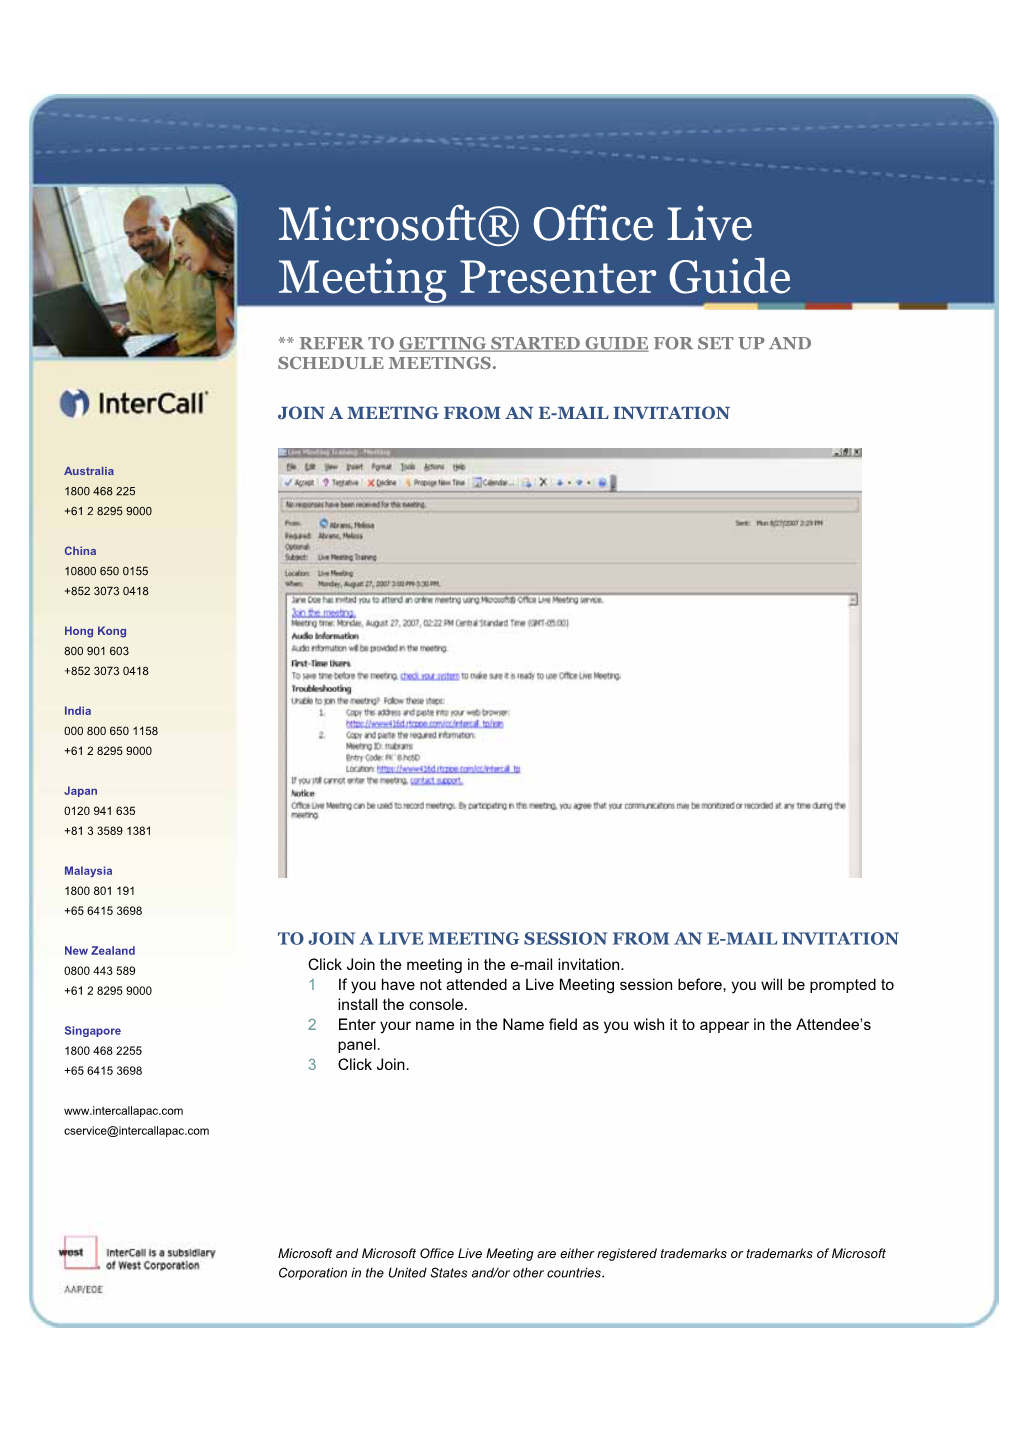 Microsoft® Office Live Meeting Presenter Guide